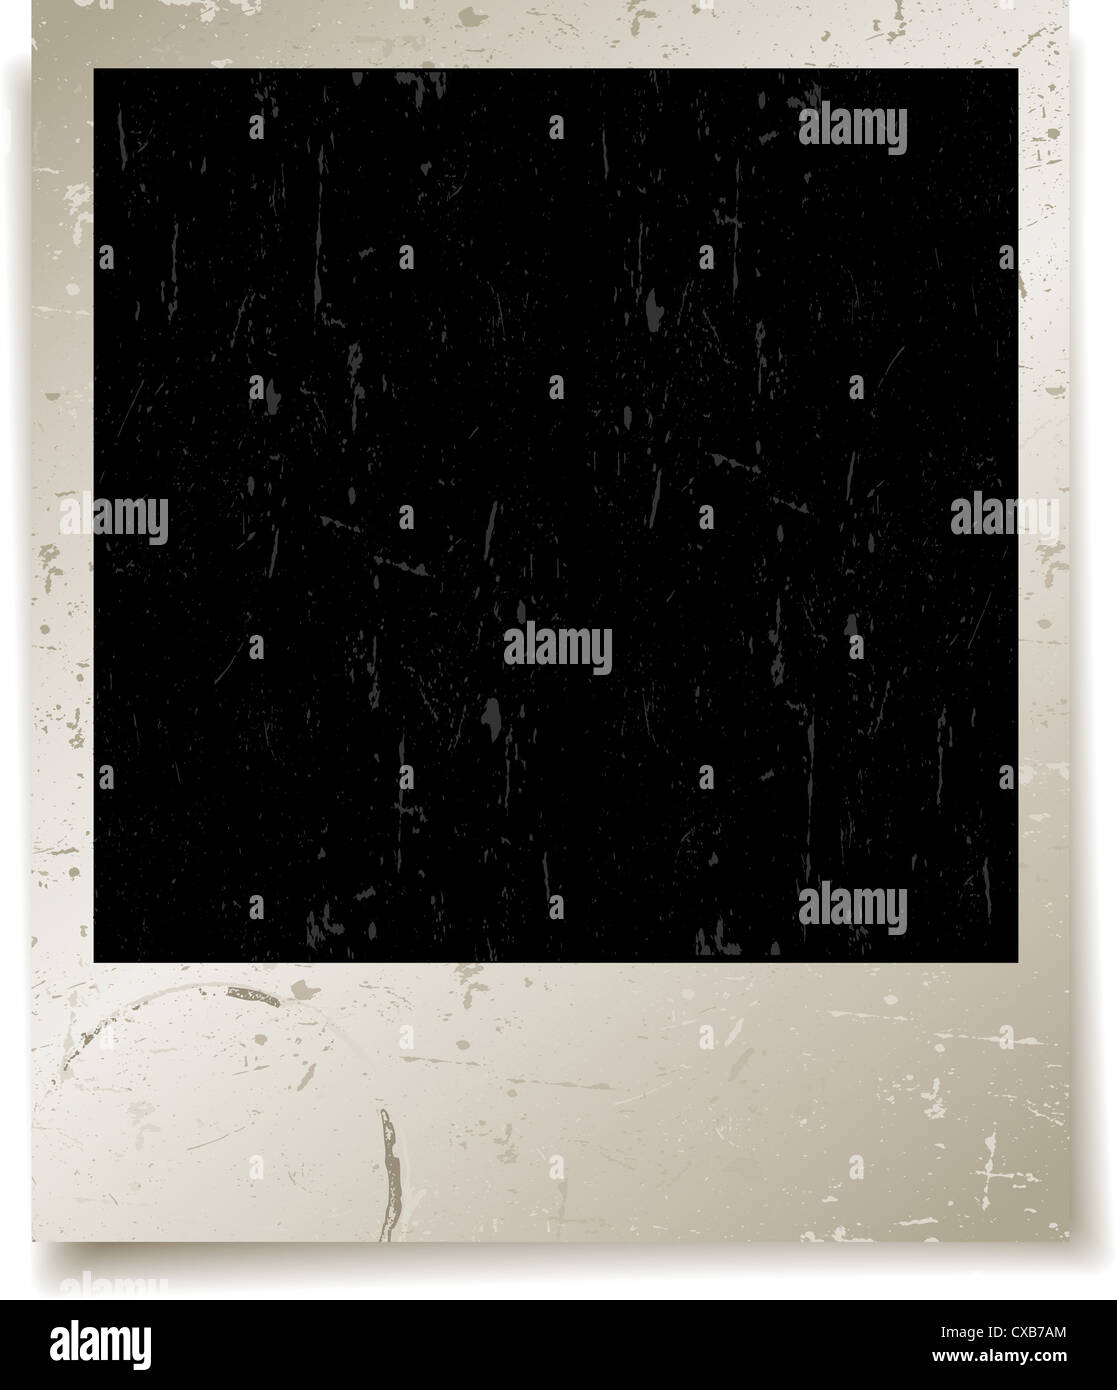 Grunge polaroid background with splats and stains Stock Photo